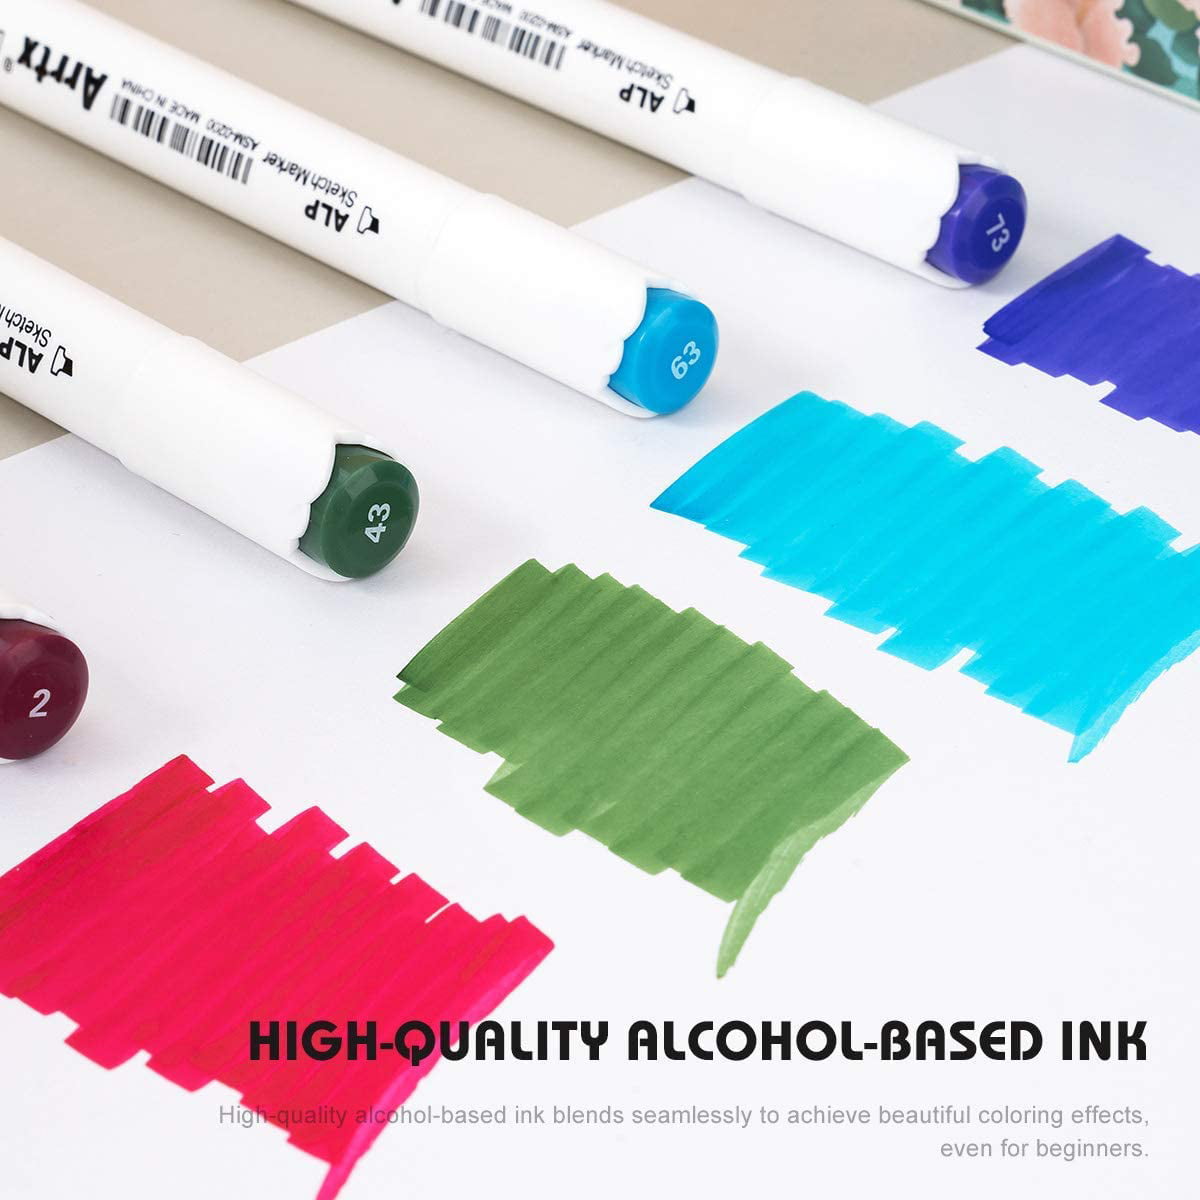 Arrtx Alcohol Markers ALP 80 Colors,Dual Tips Permanent Drawing